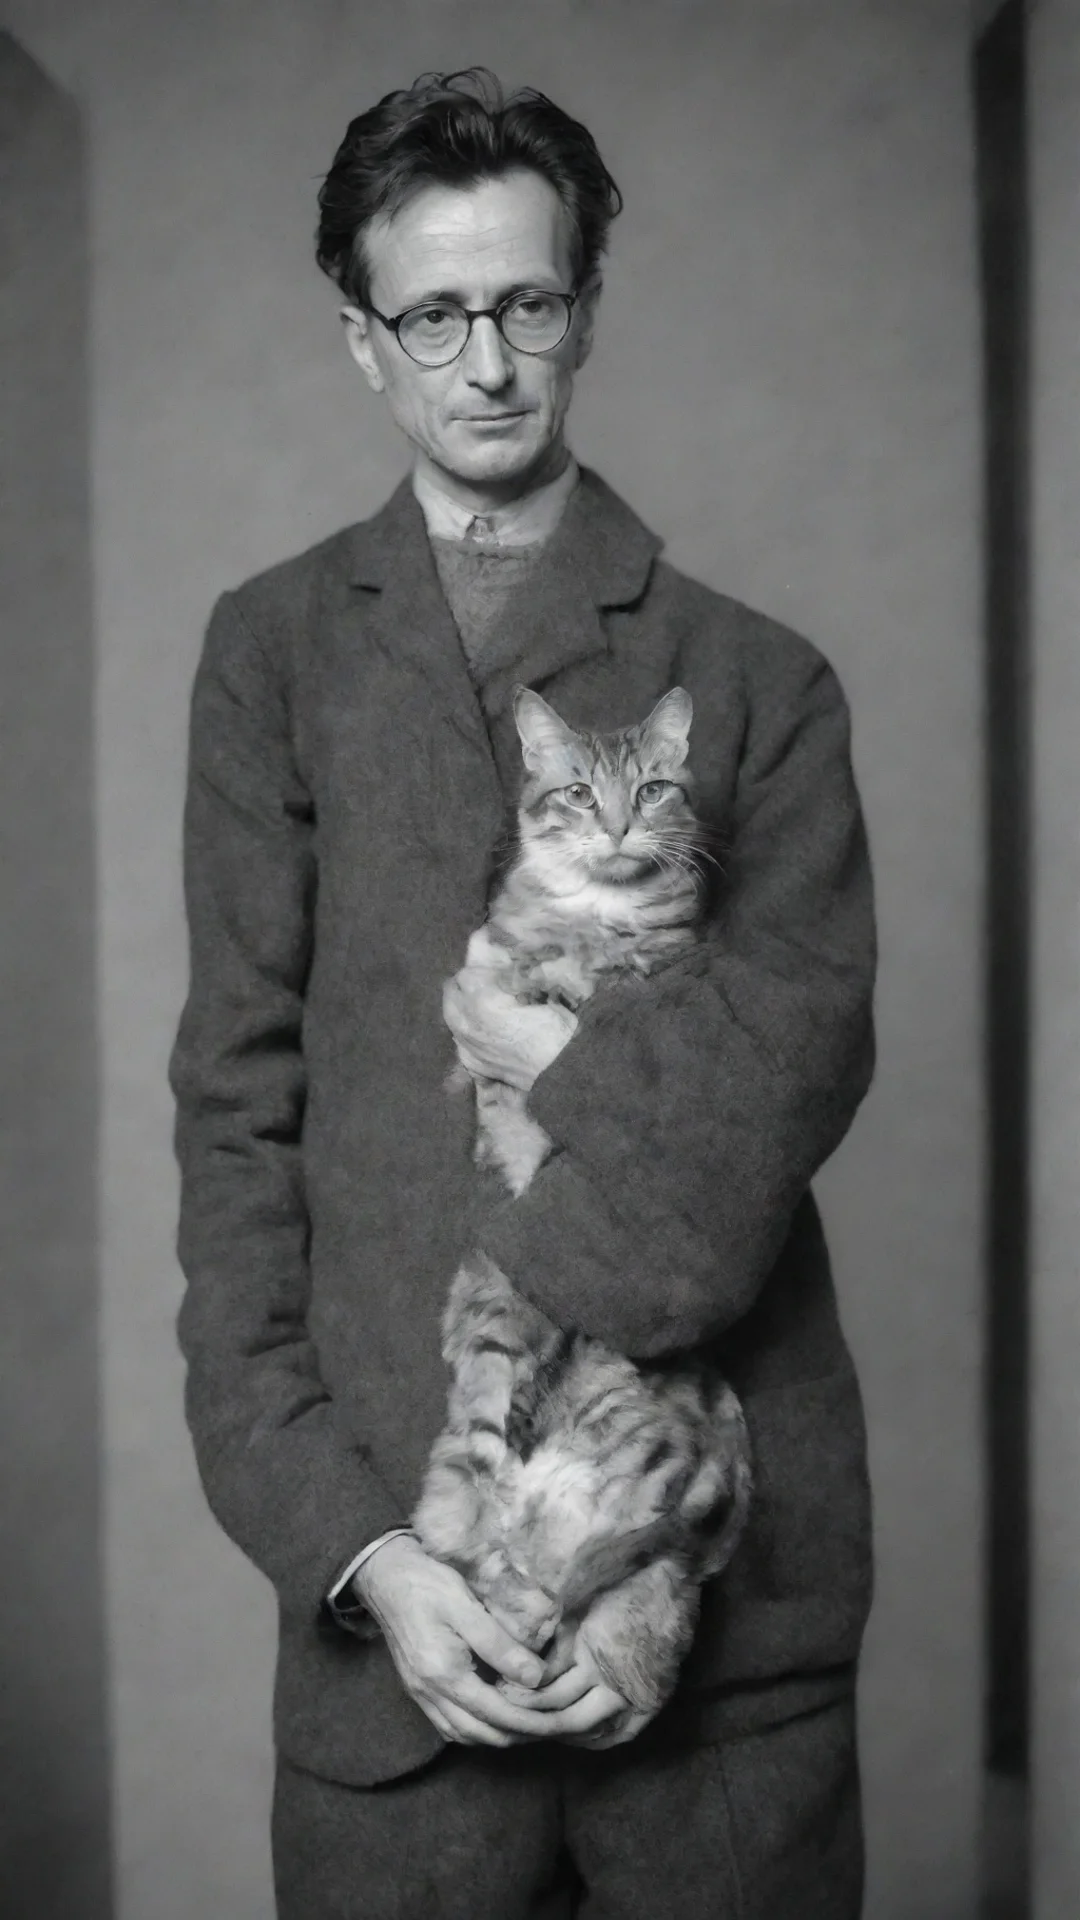 aiamazing erwin schrodinger  holding a cat awesome portrait 2 tall